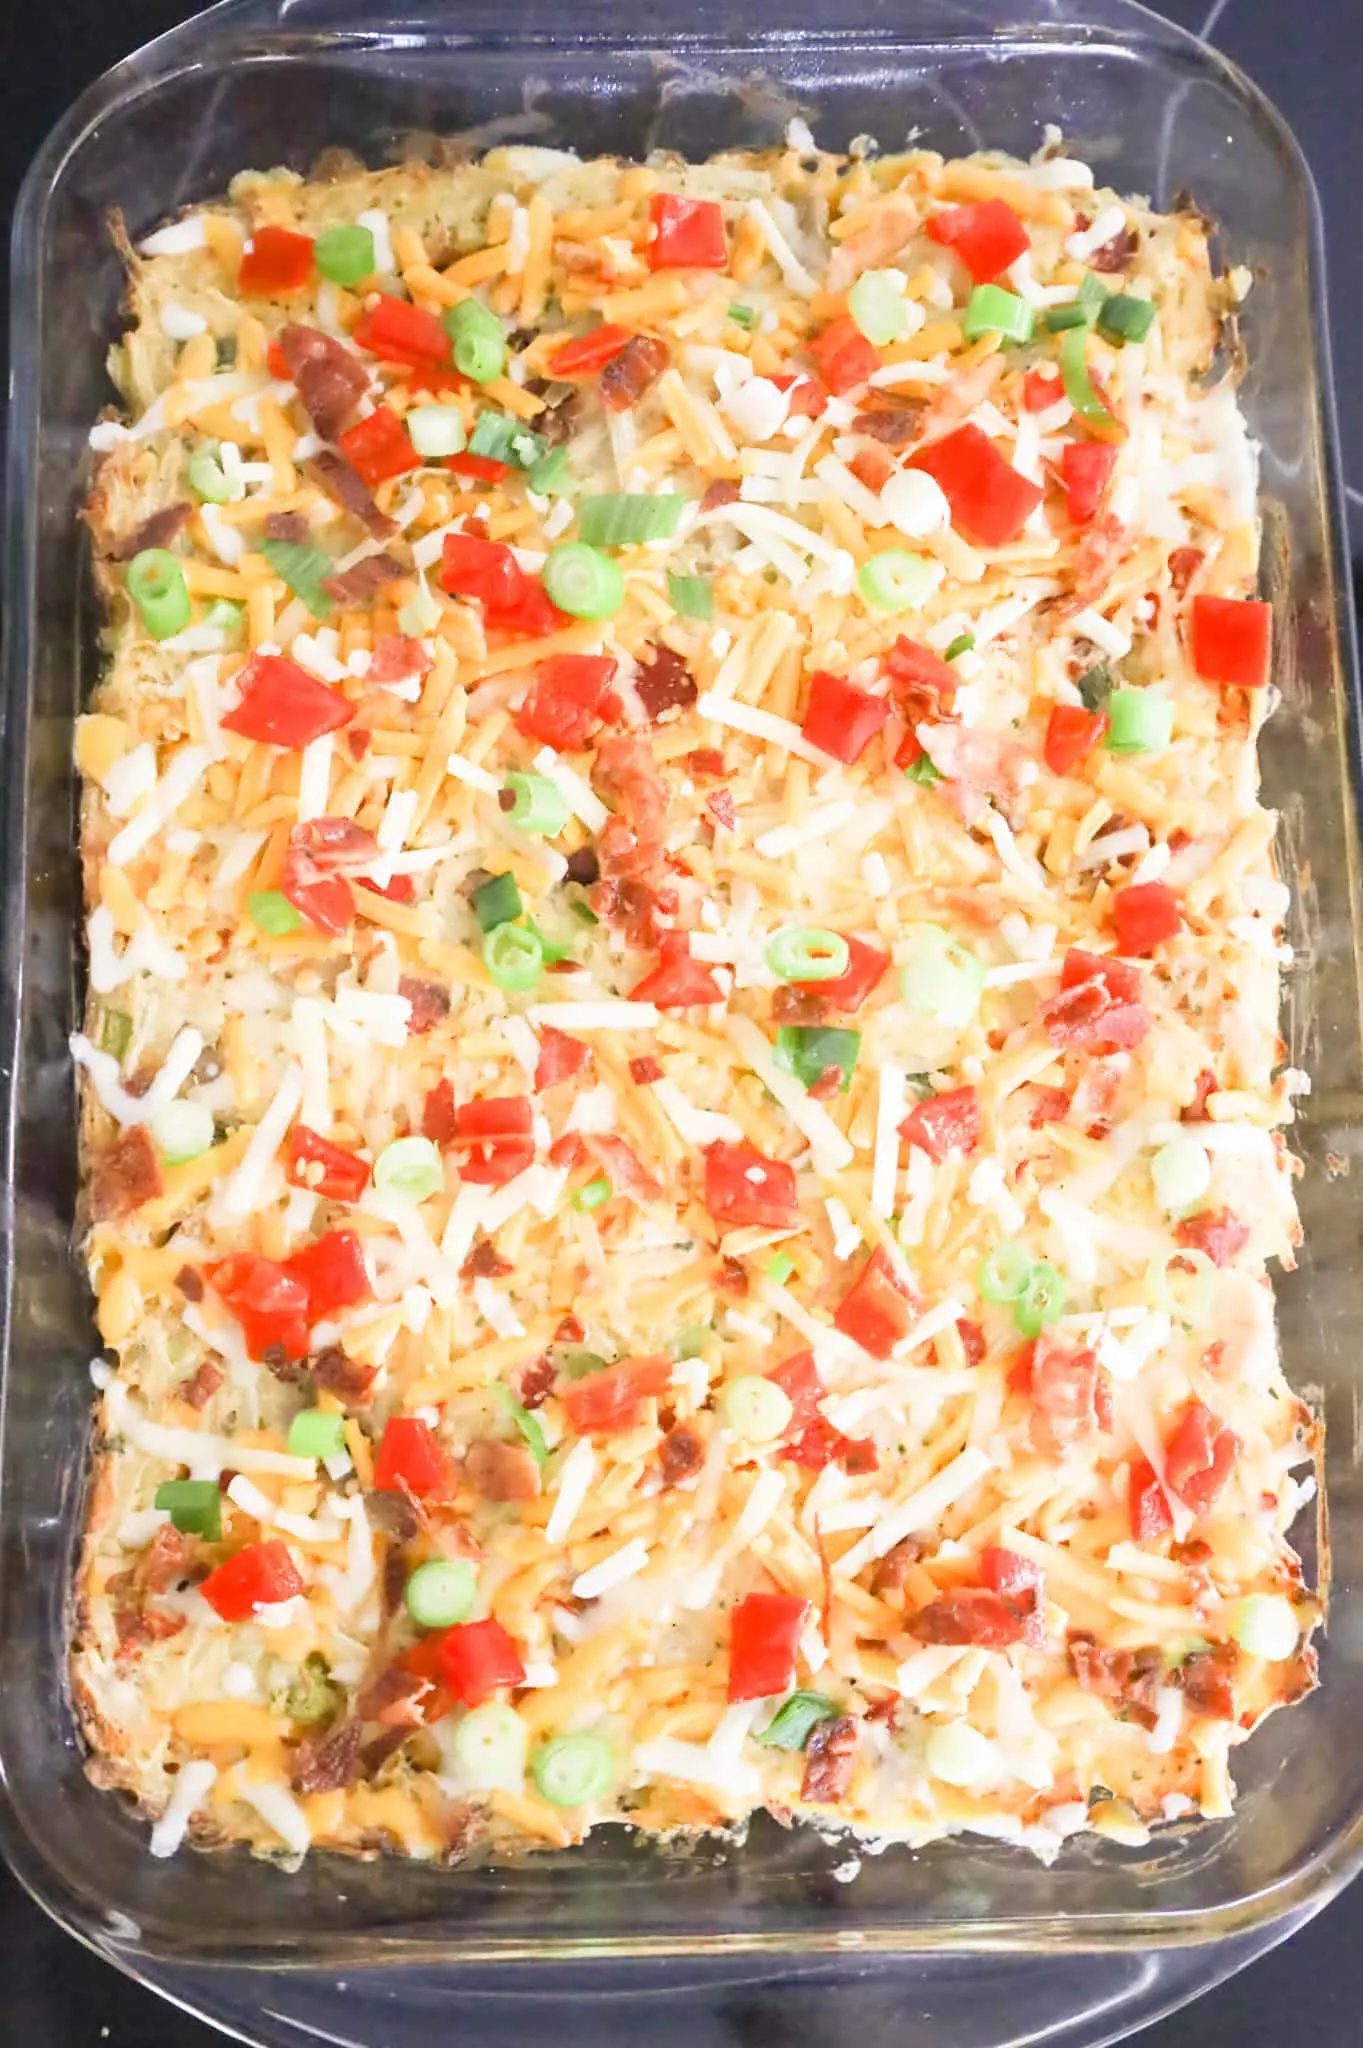 roasted red peppers, chopped green onions, crumbled bacon and shredded cheese on top of a hashbrown casserole